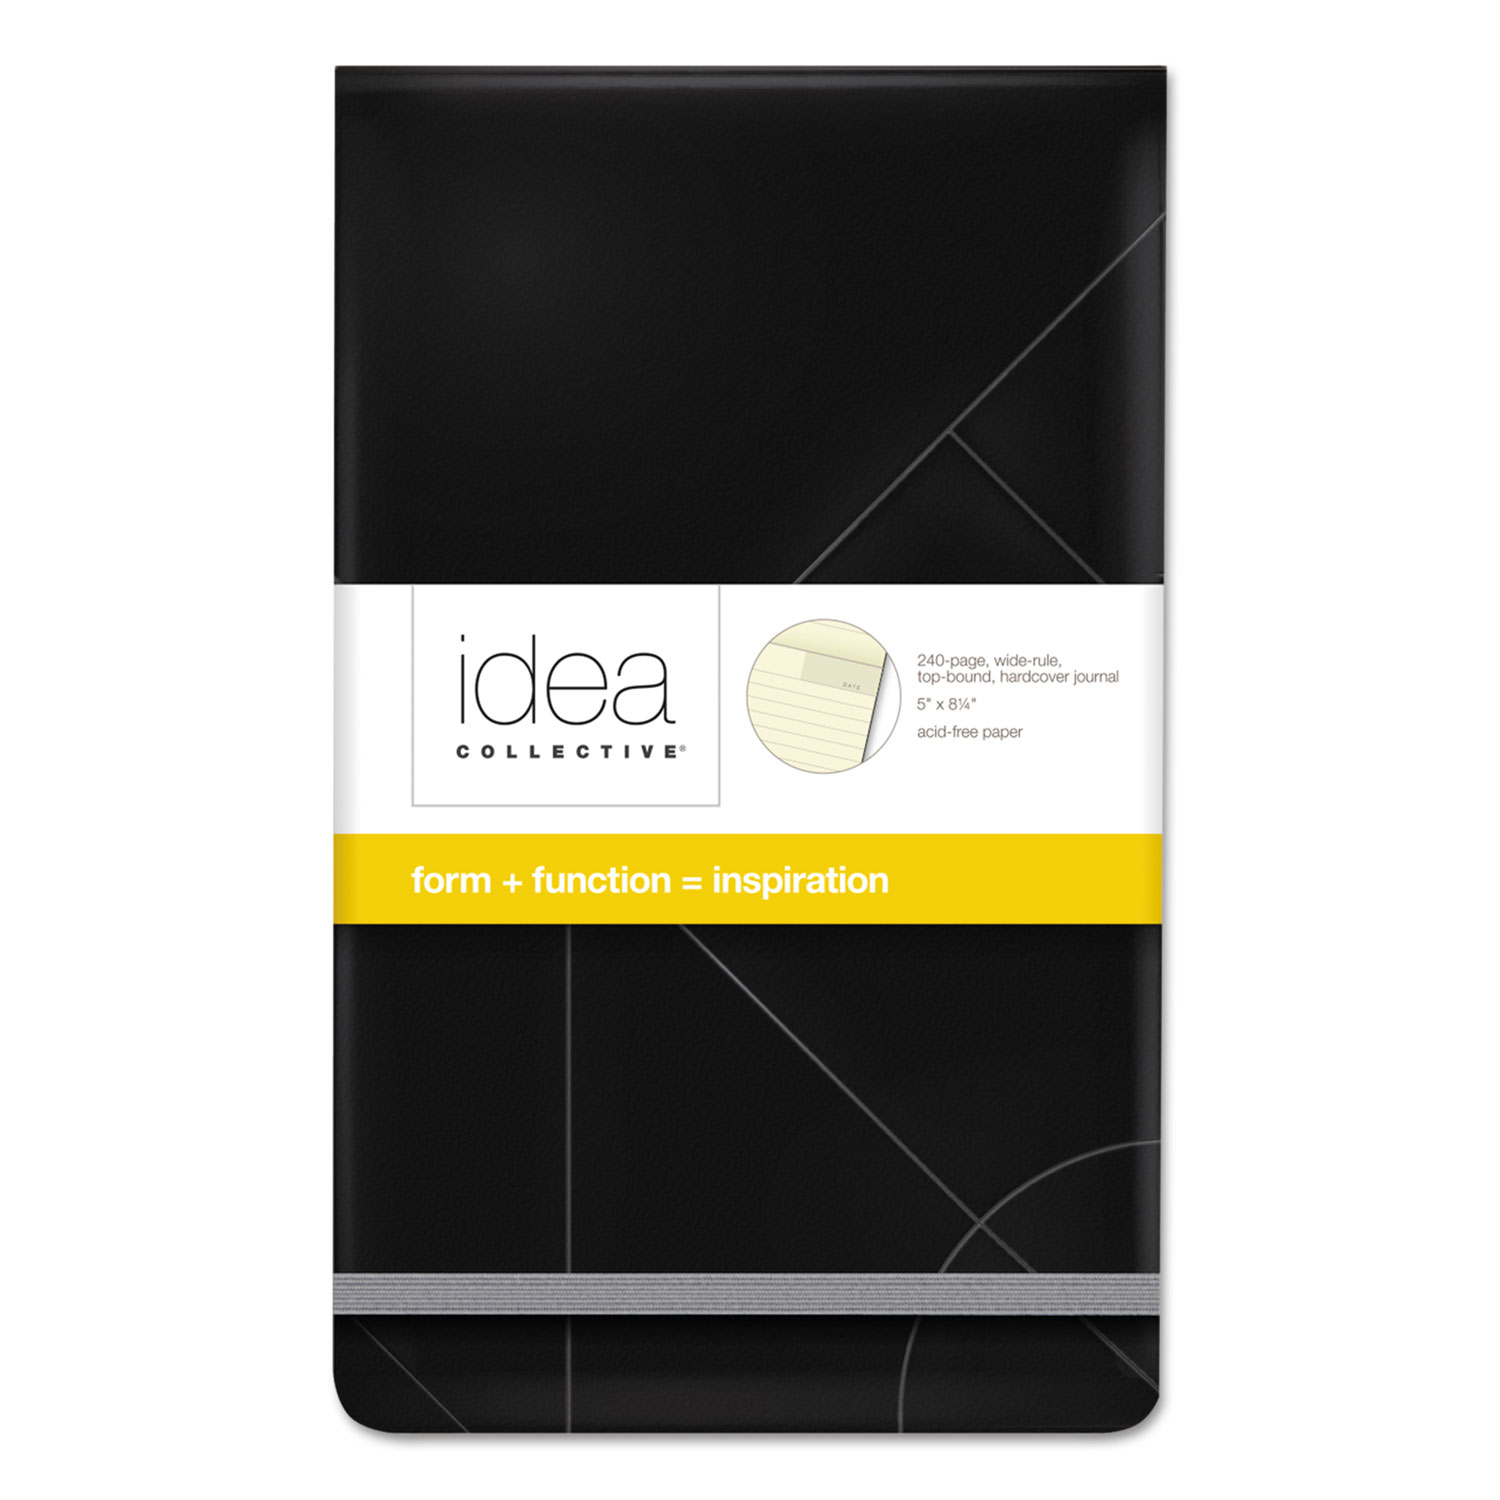 TOPS Black Cover Wide Ruled Top Bound Journal - 240 Sheets - 5 1/4" x 8 1/4" - Cream Paper - Black Cover - Acid-free, Durable, E